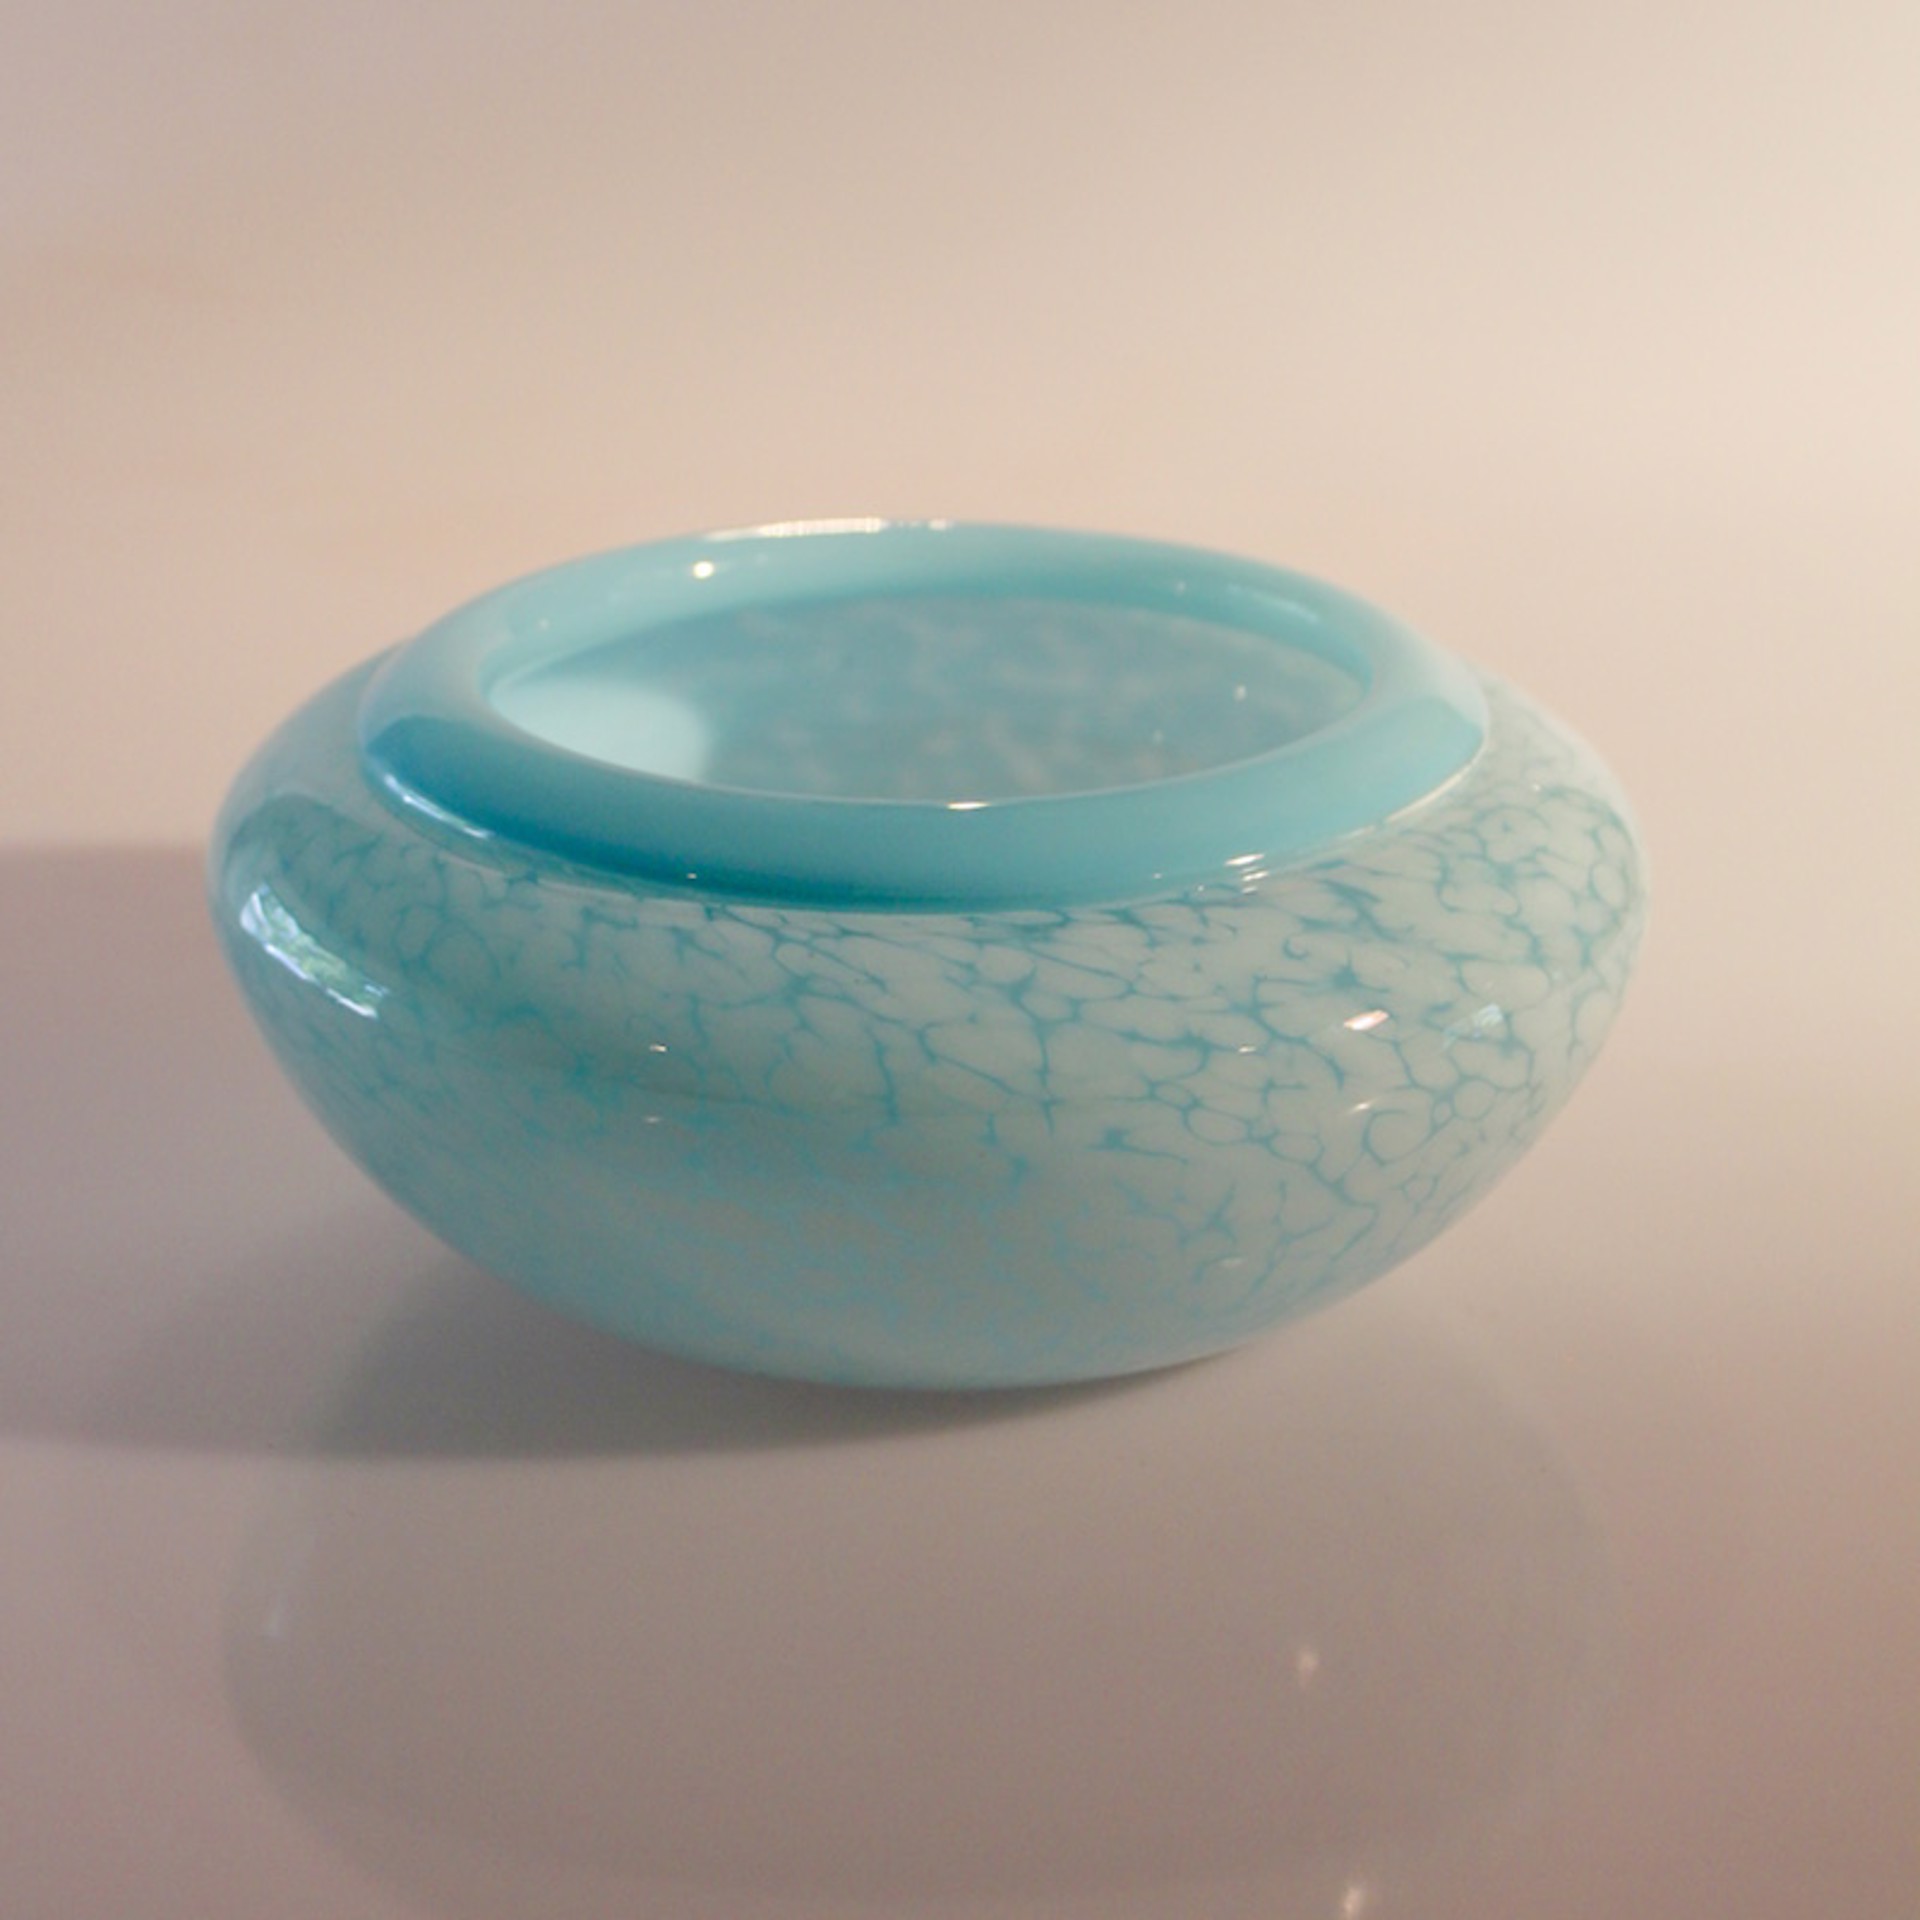 Inside Out Baby Blue Bowl 1 by Hayden MacRae